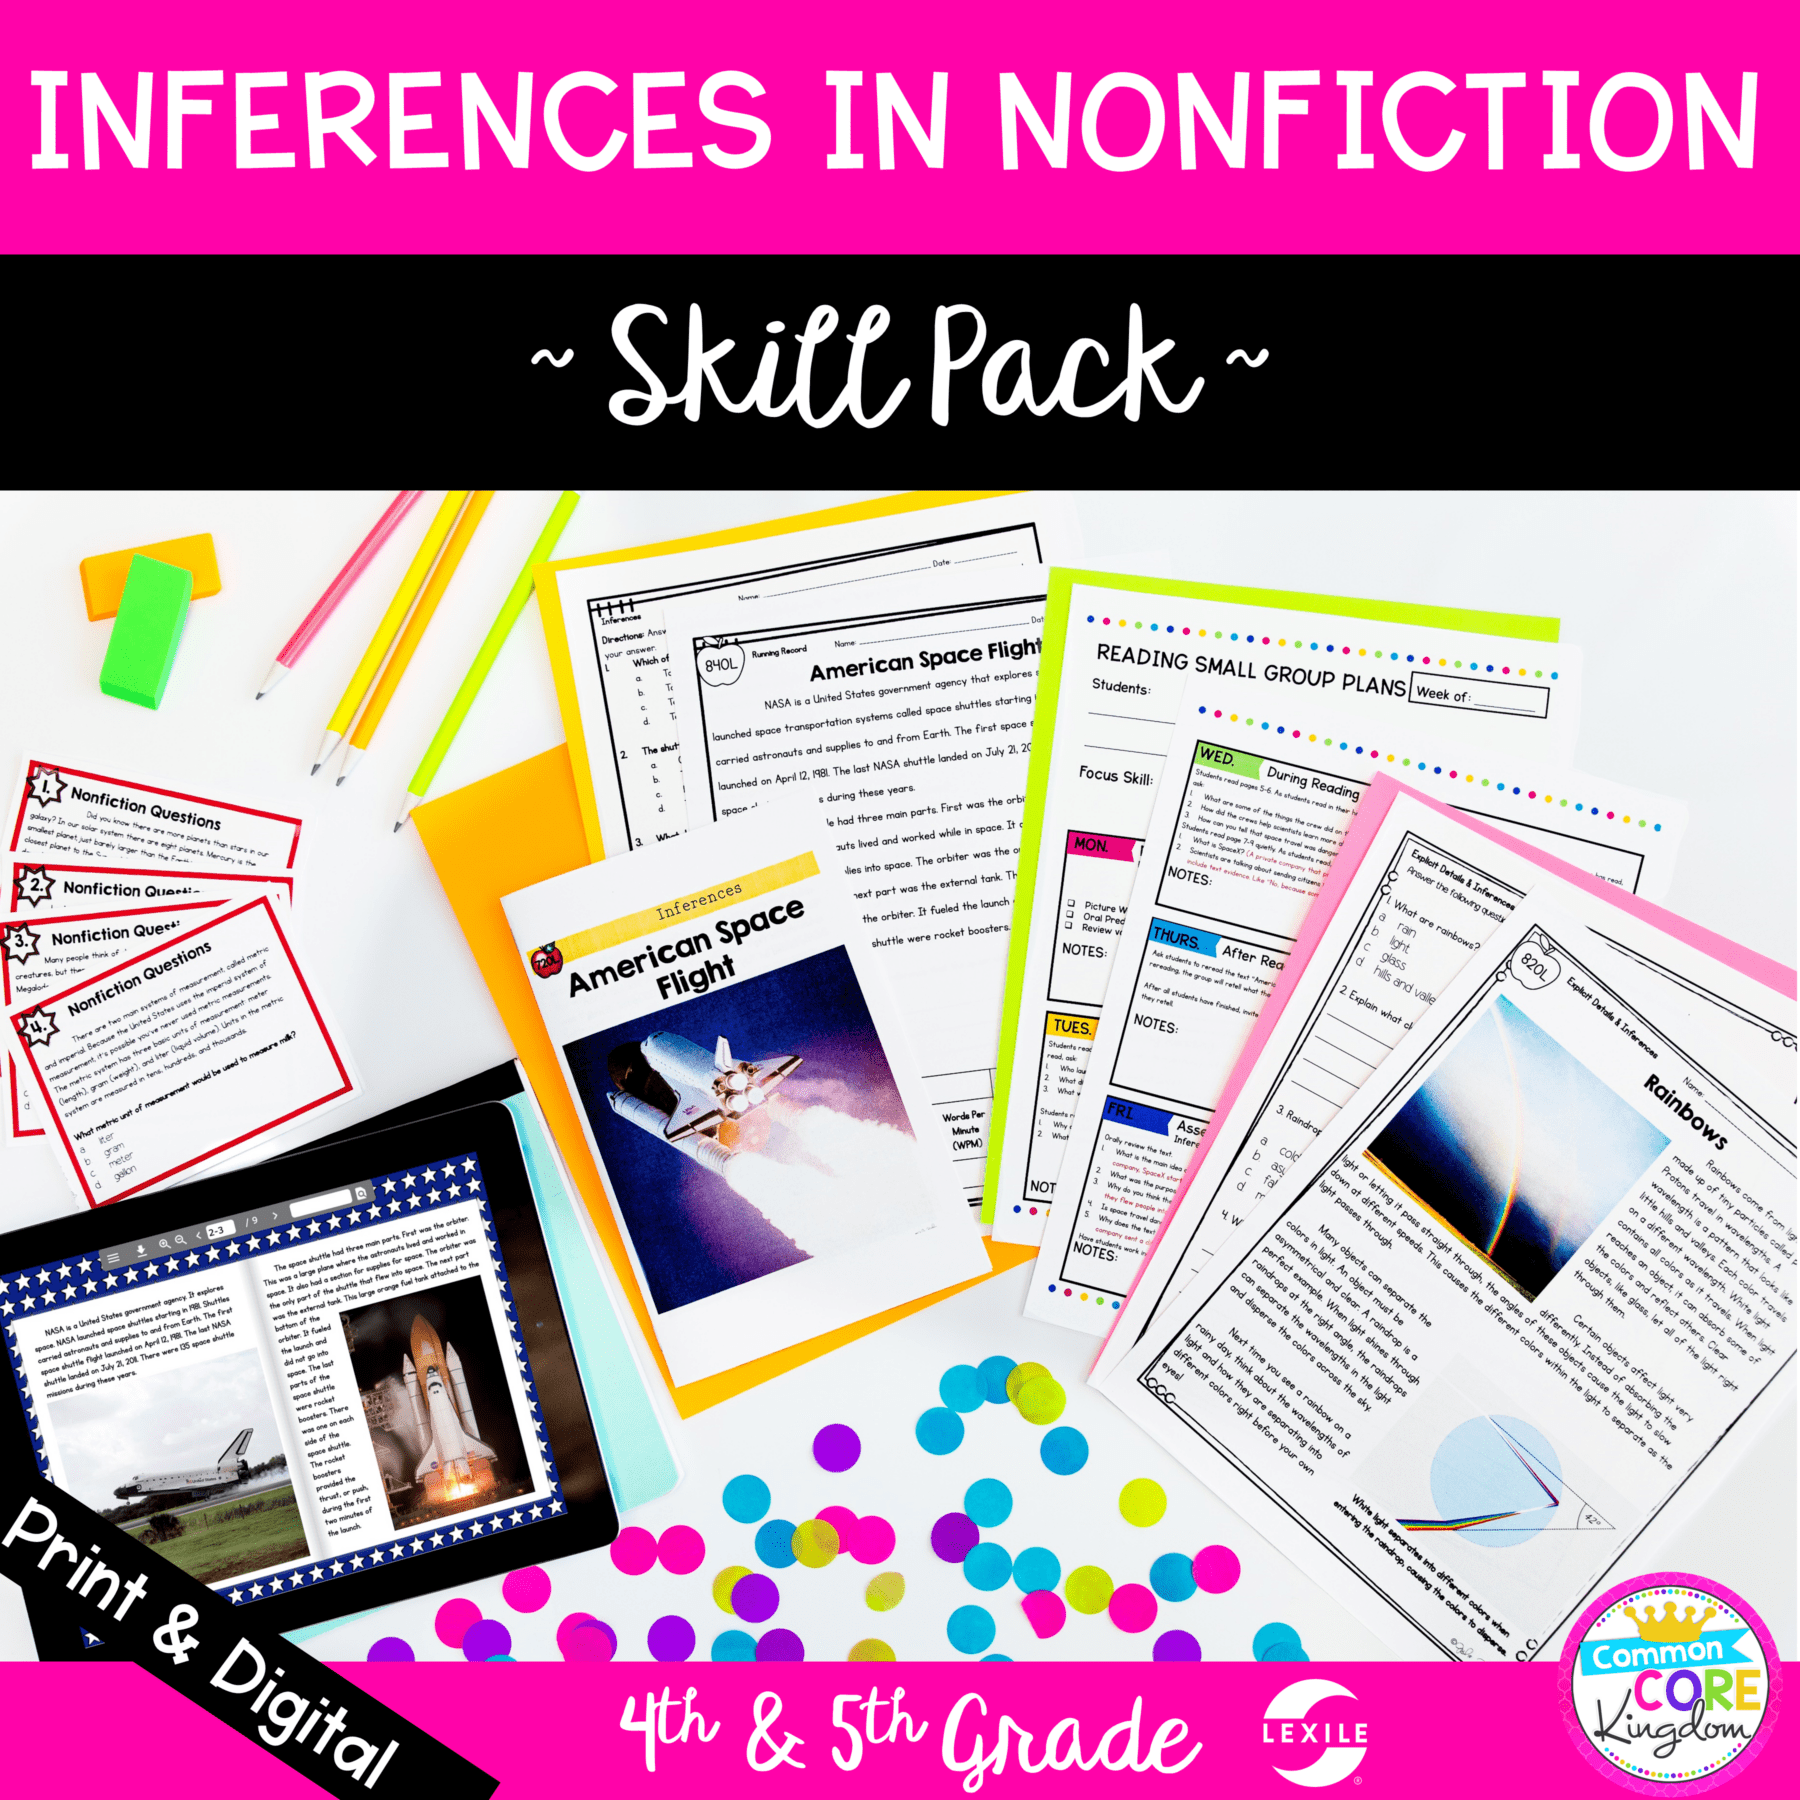 Inferences in nonfiction skill pack cover for 4th and 5th grade showing printable and digital resources with colored paper in the background